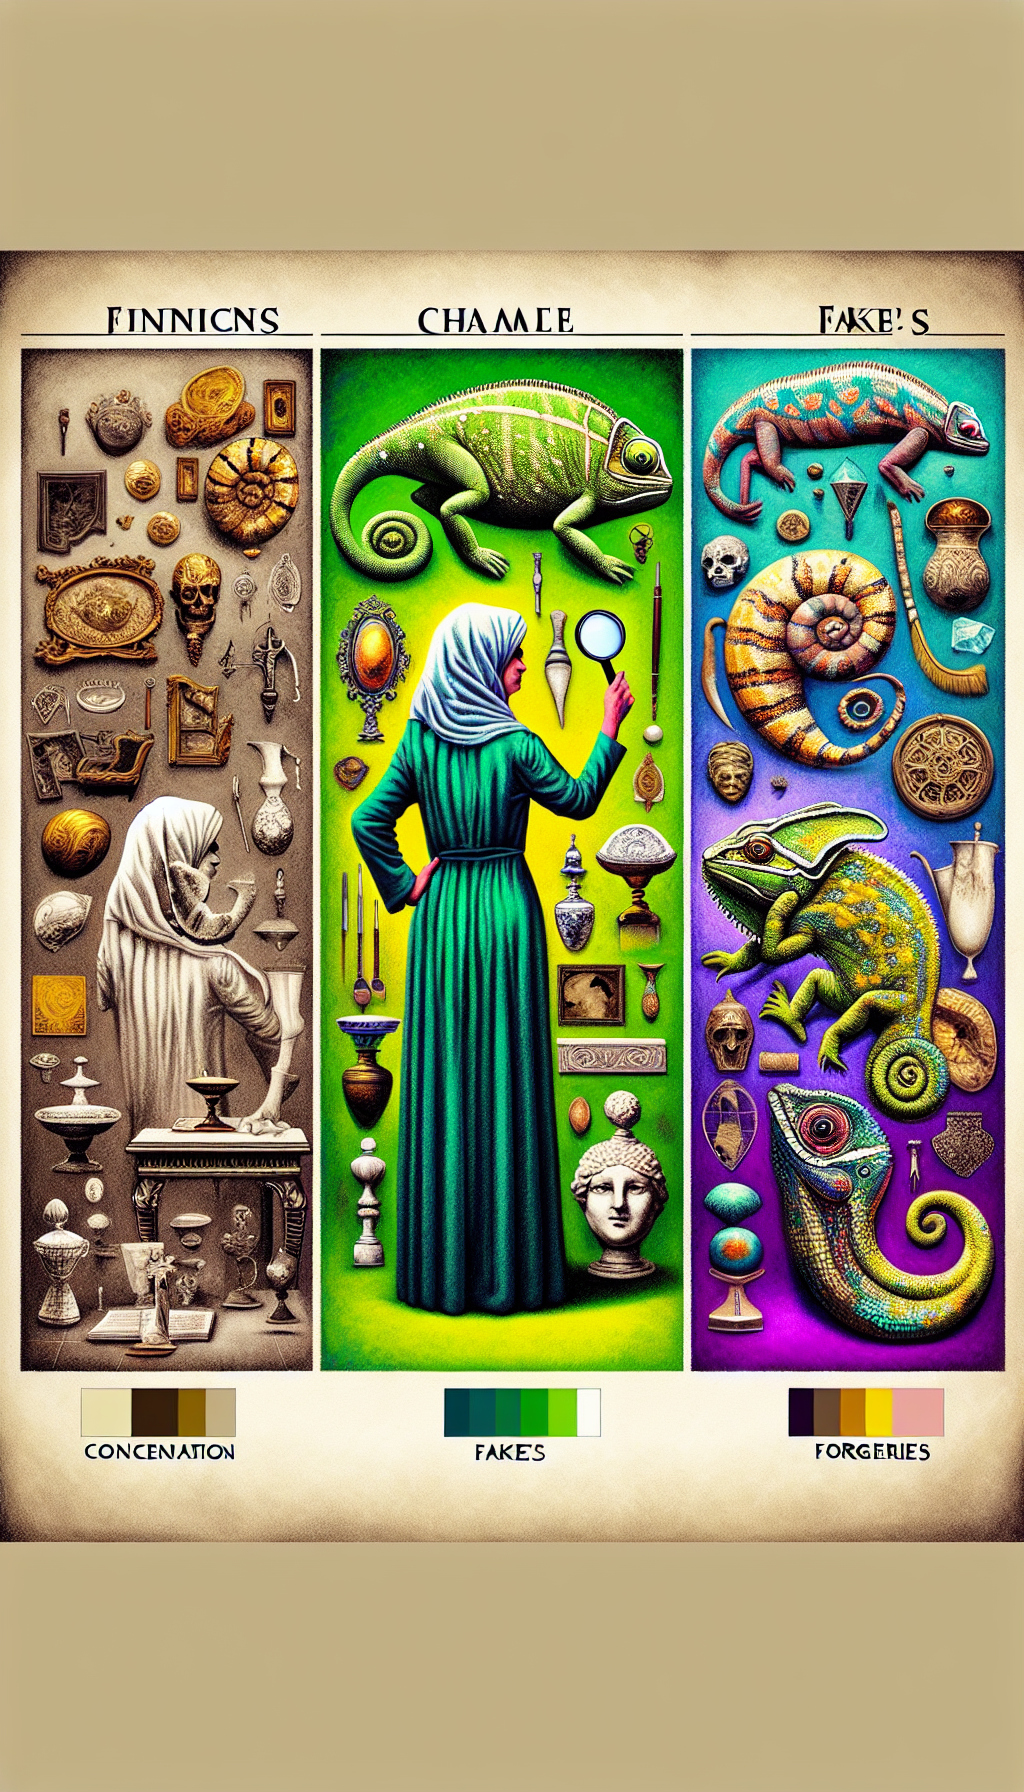 An illustration divided into three distinct vignettes, each with its own unique art style—classic realism for 'Findings', surrealist for 'Fakes', and abstract for 'Forgeries'. At the center stands an appraiser with a magnifying glass scrutinizing a chameleon, symbolizing the challenge of discerning authenticity in antiques, with the chameleon's skin mimicking patterns from each art style around it.